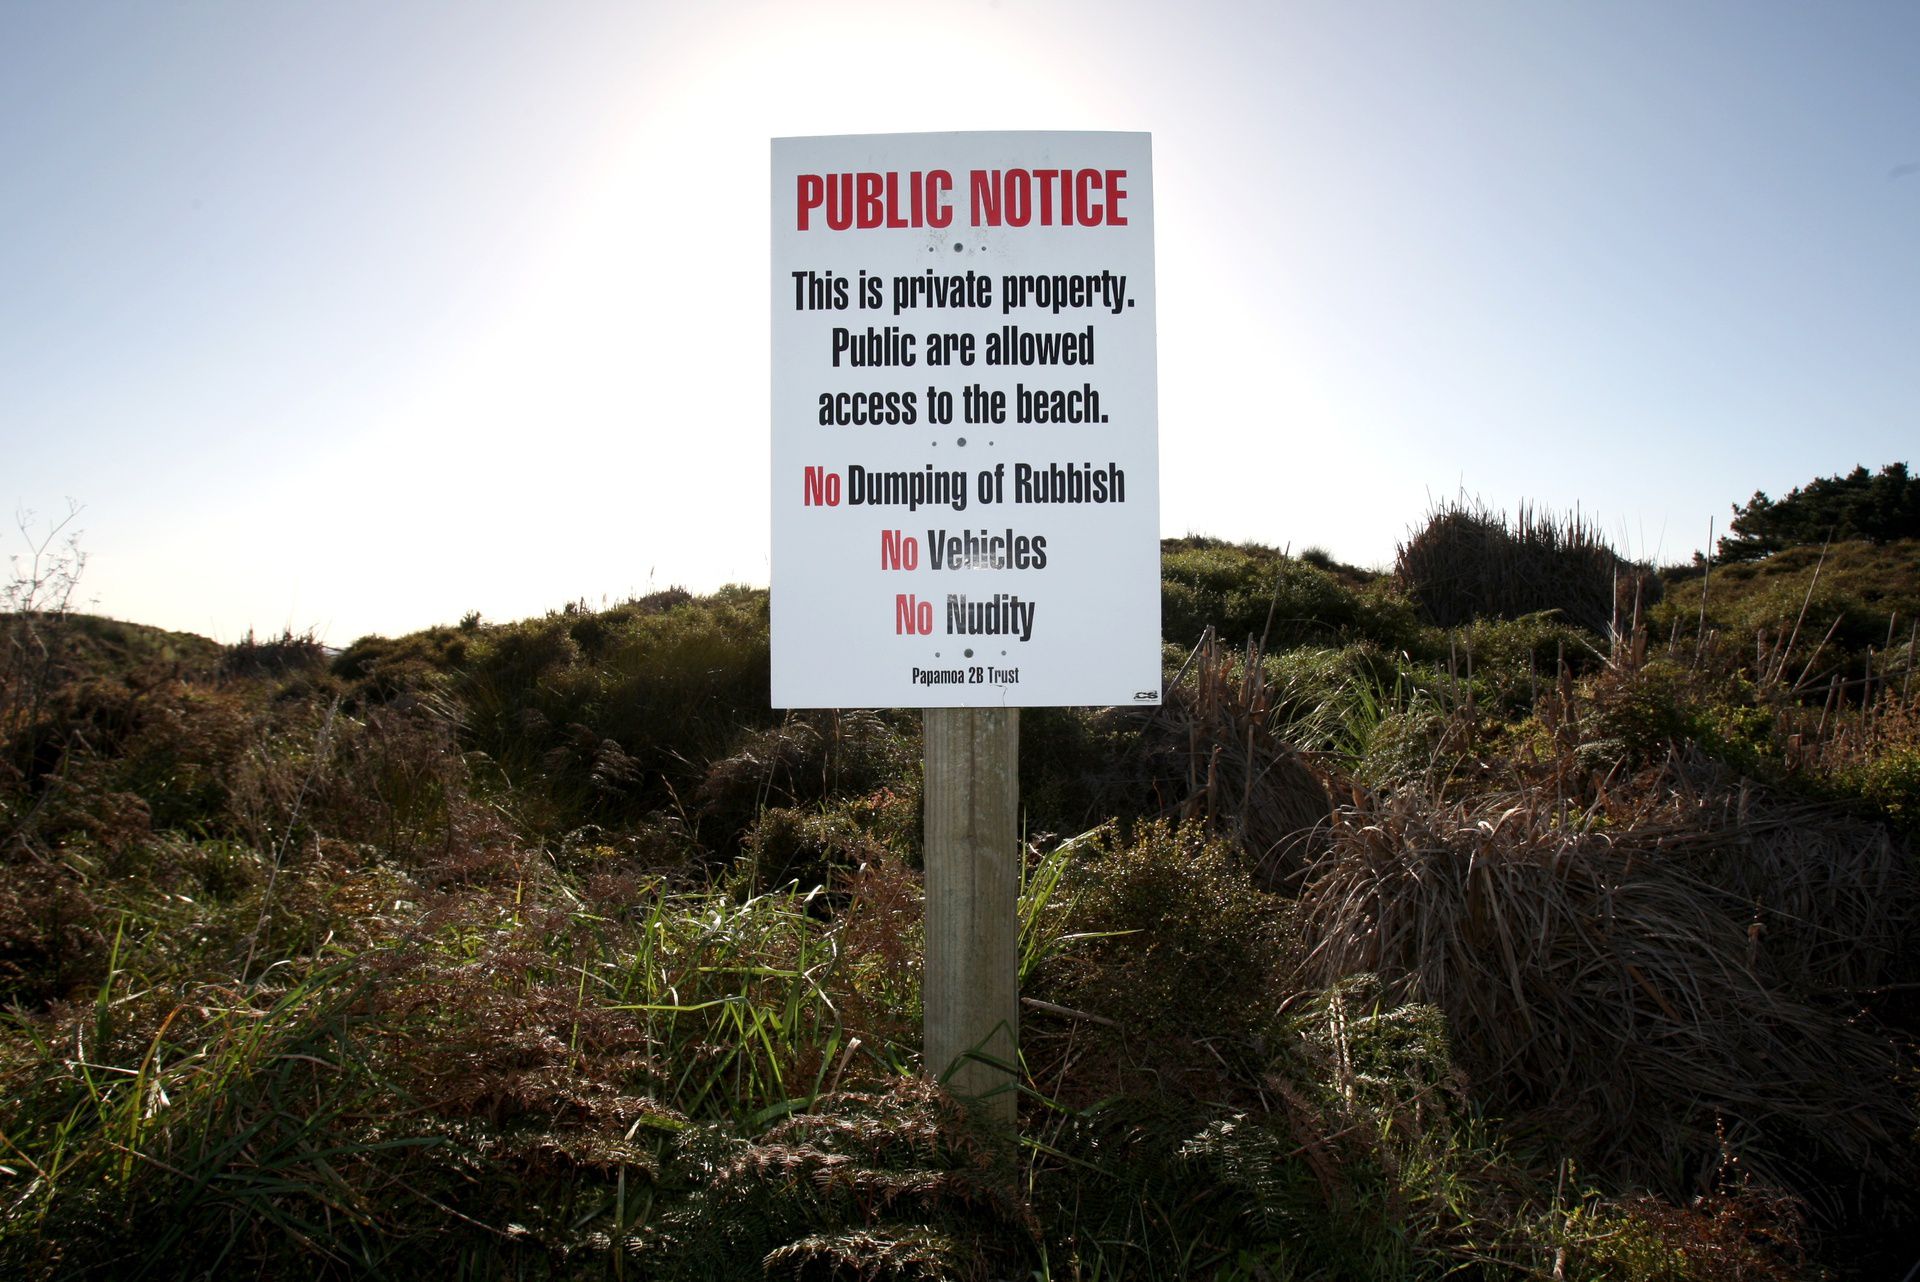 Private Nudist Groups - Dawn Picken: Bodies are beautiful - why do some of us have trouble with  public nudity? - NZ Herald